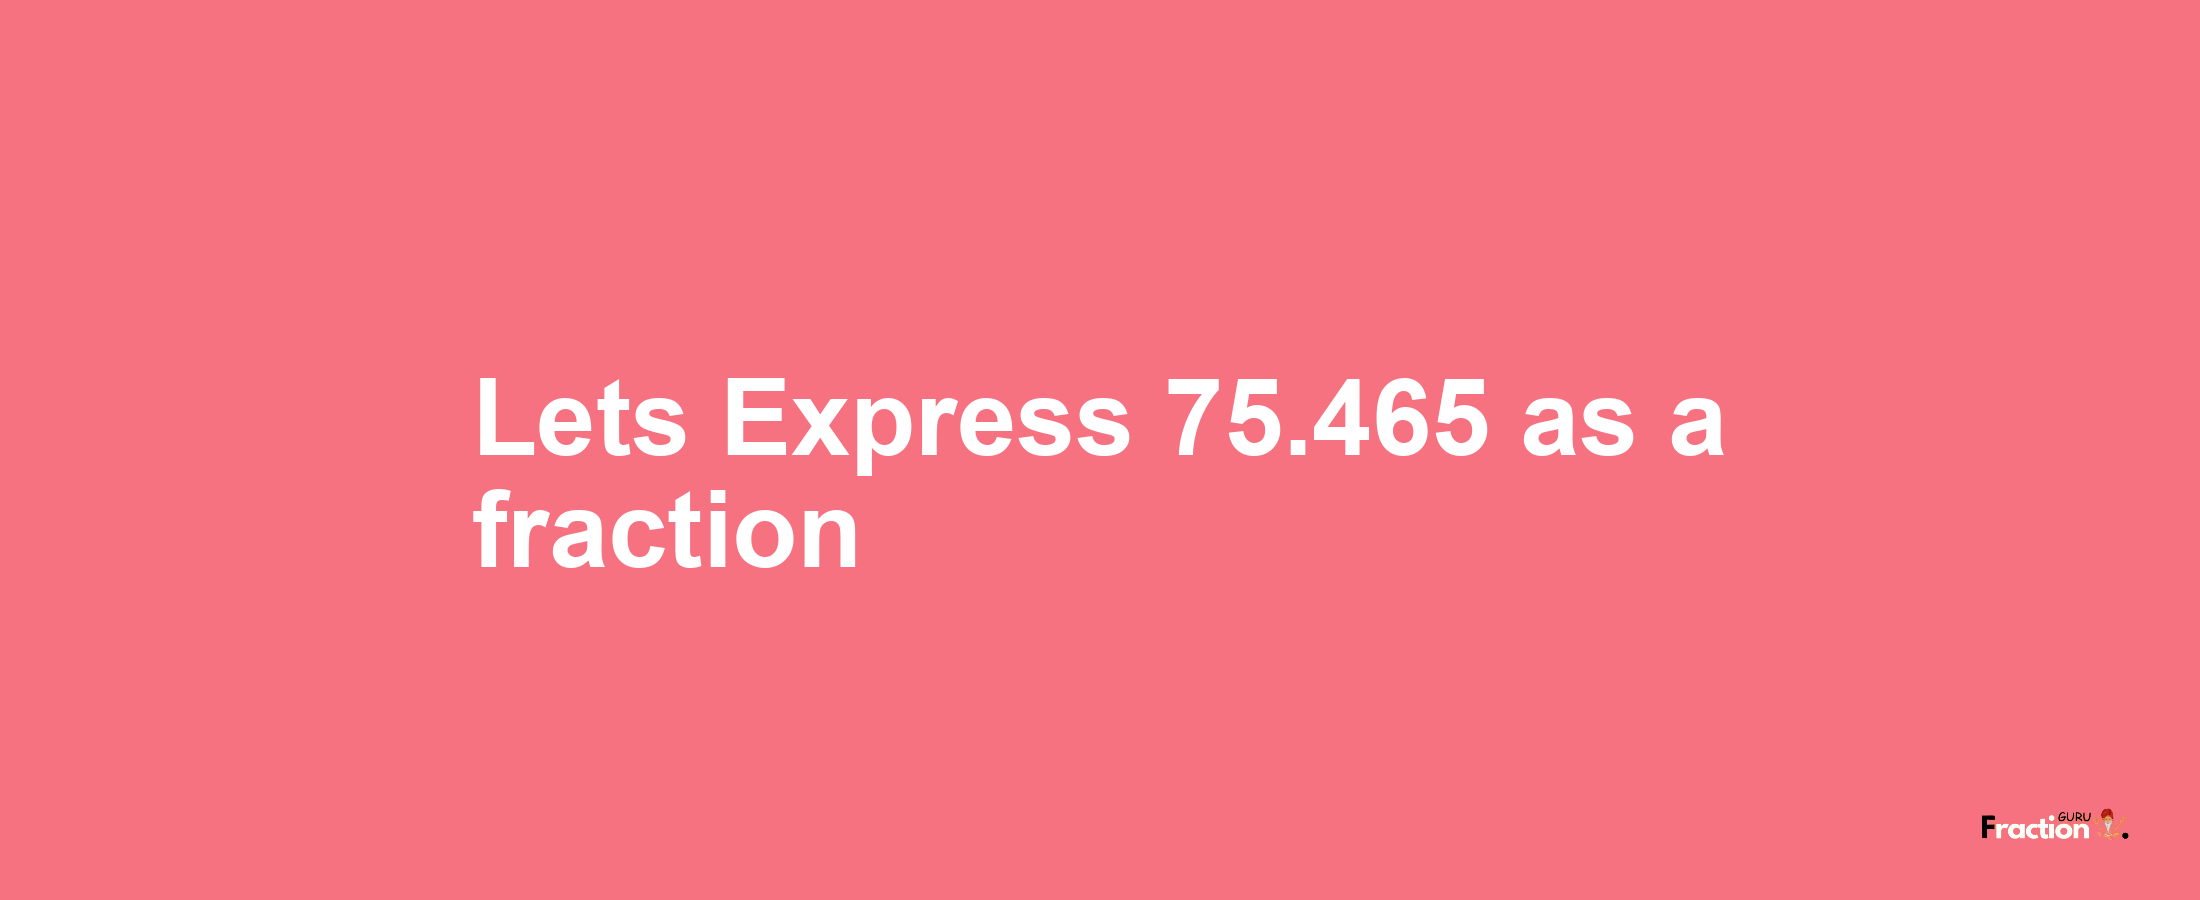 Lets Express 75.465 as afraction